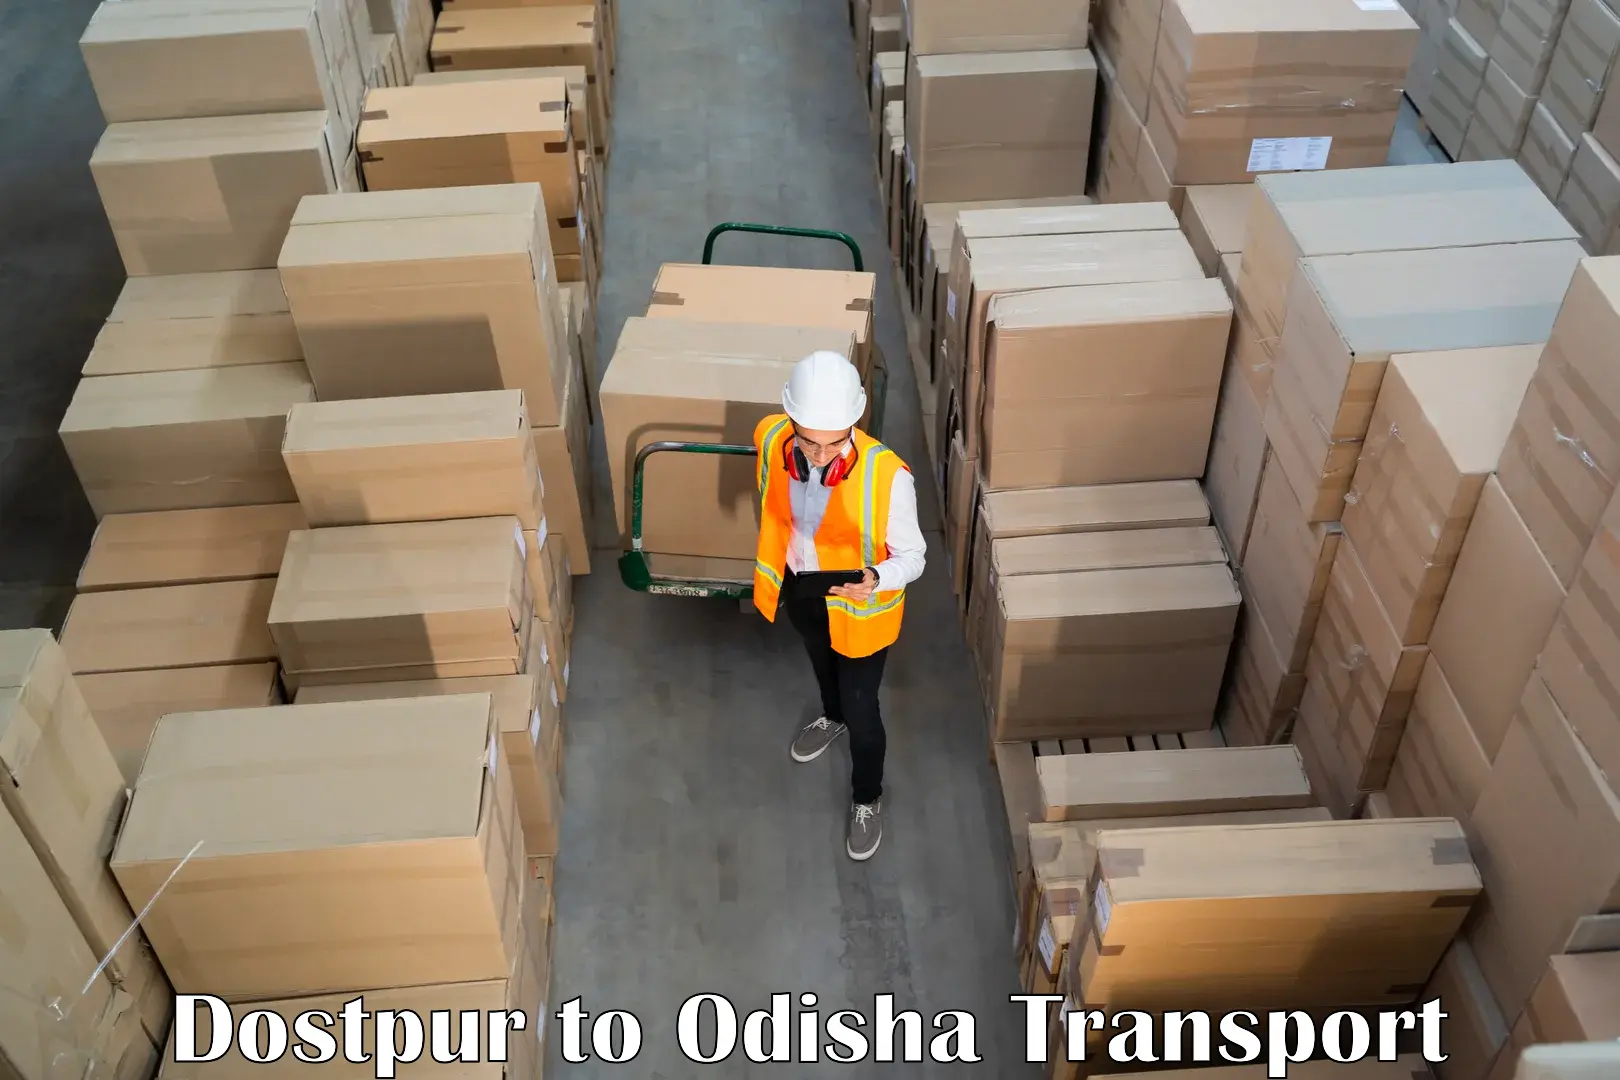 Air freight transport services Dostpur to Odisha